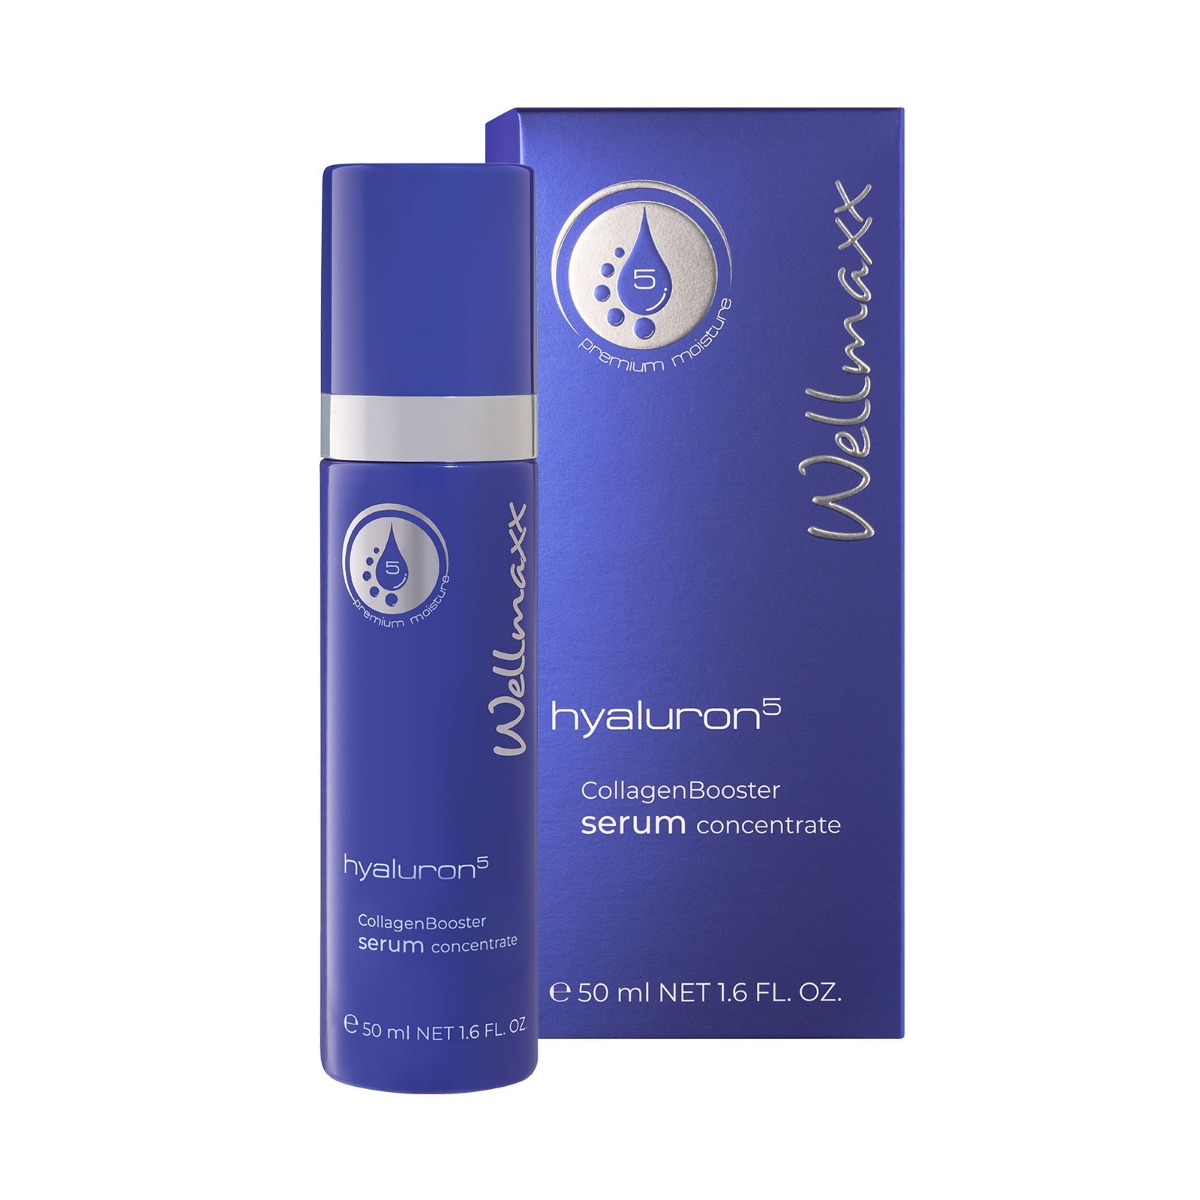 hyaluron⁵ CollagenBooster serum concentrate